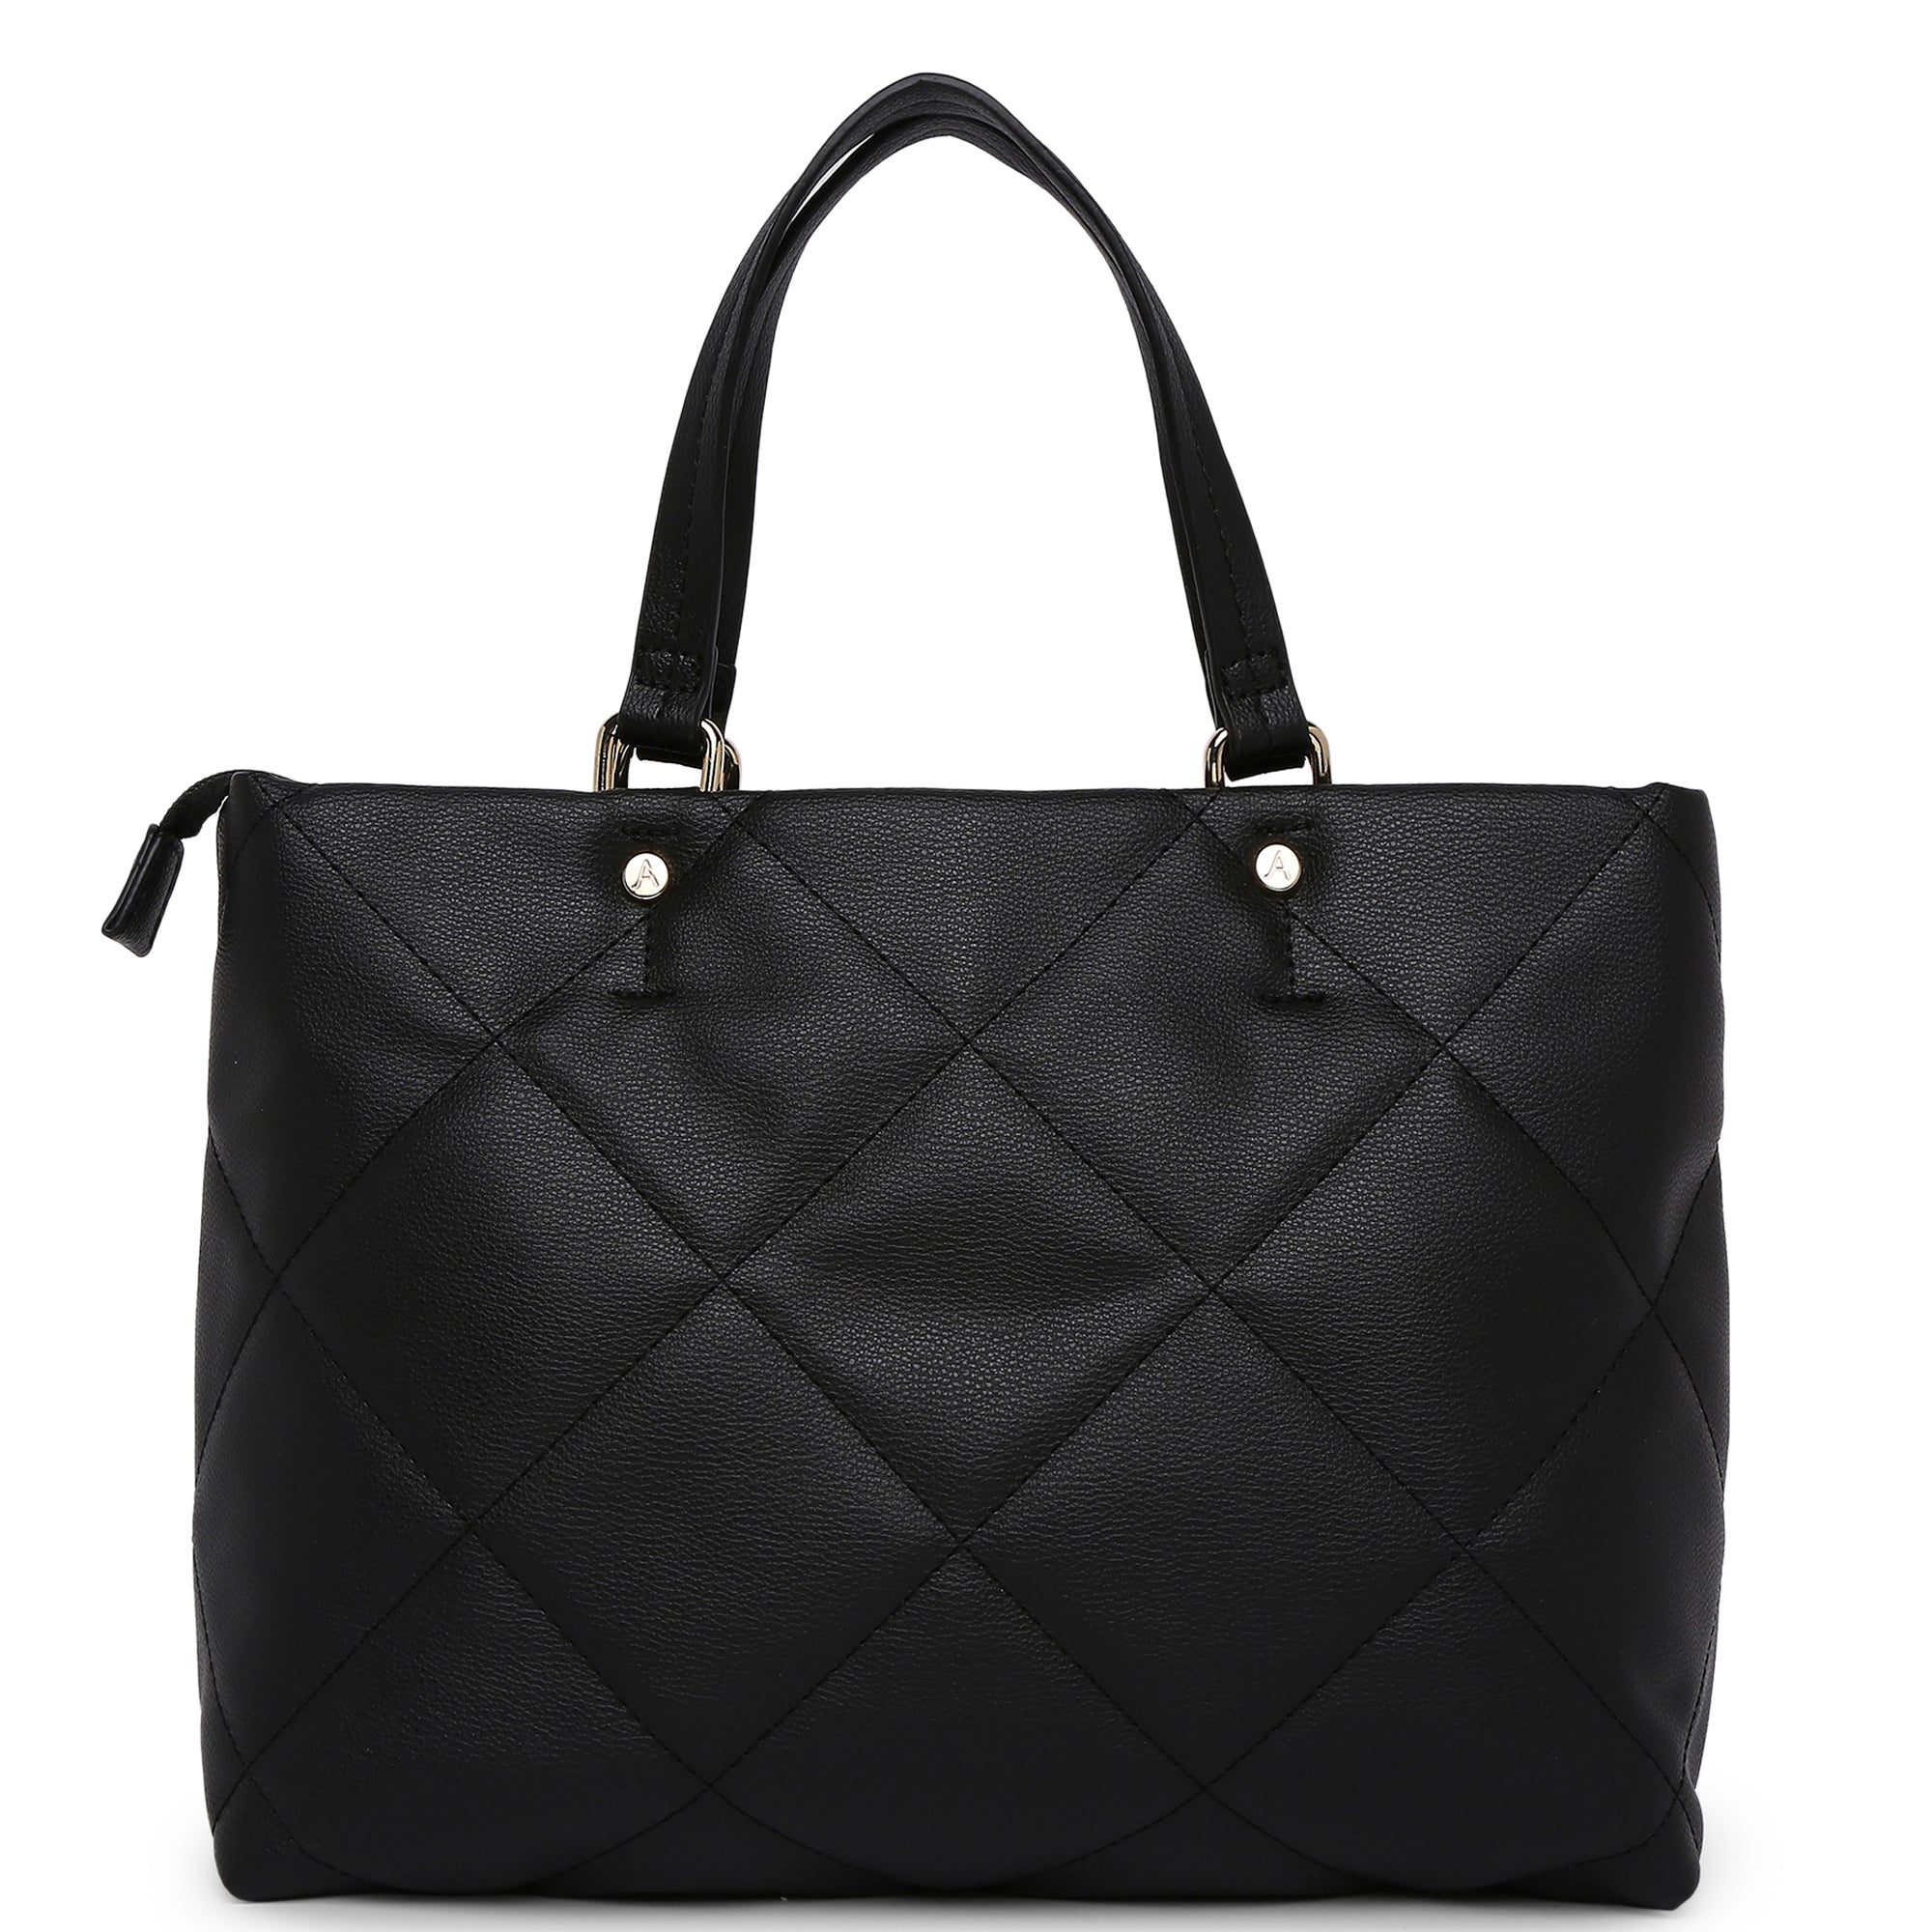 Accessorize London Women's Faux Leather Black Kayleigh Quilted Handheld Bag